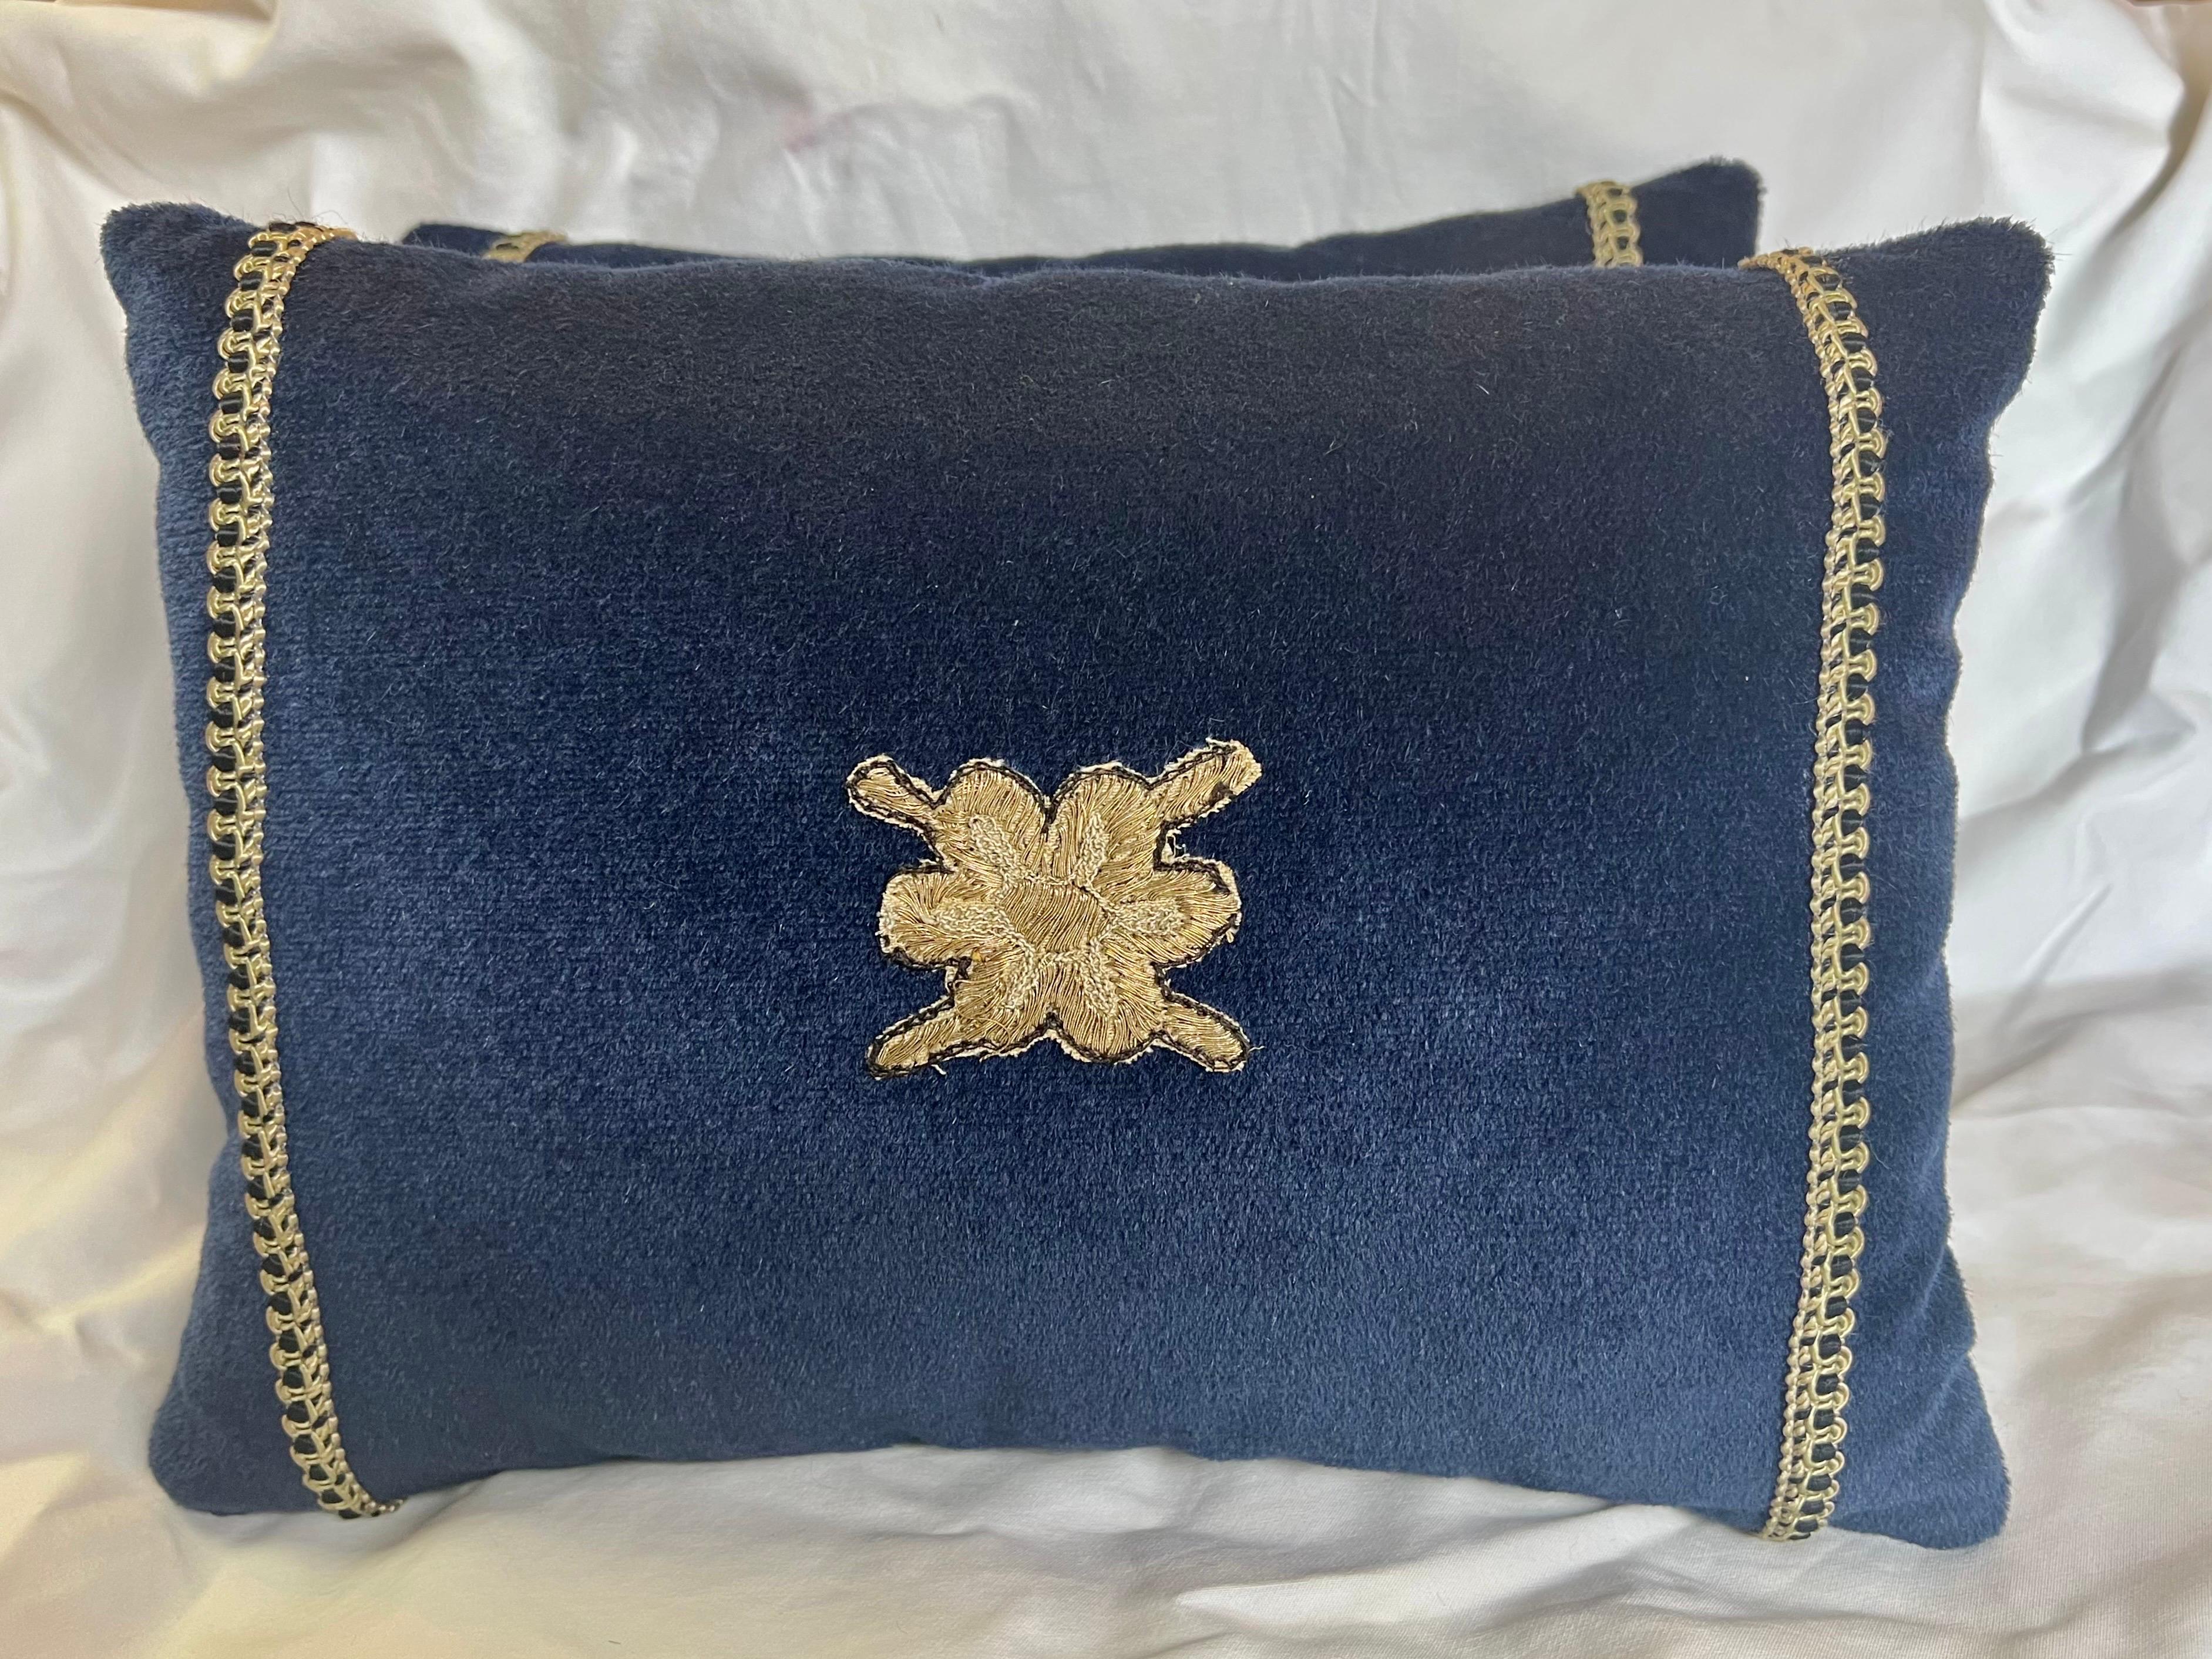 Pair of custom blue mohair pillows with 19th century appliques in the center and a small gimp on either side of applique. Down inserts, zipper closures.